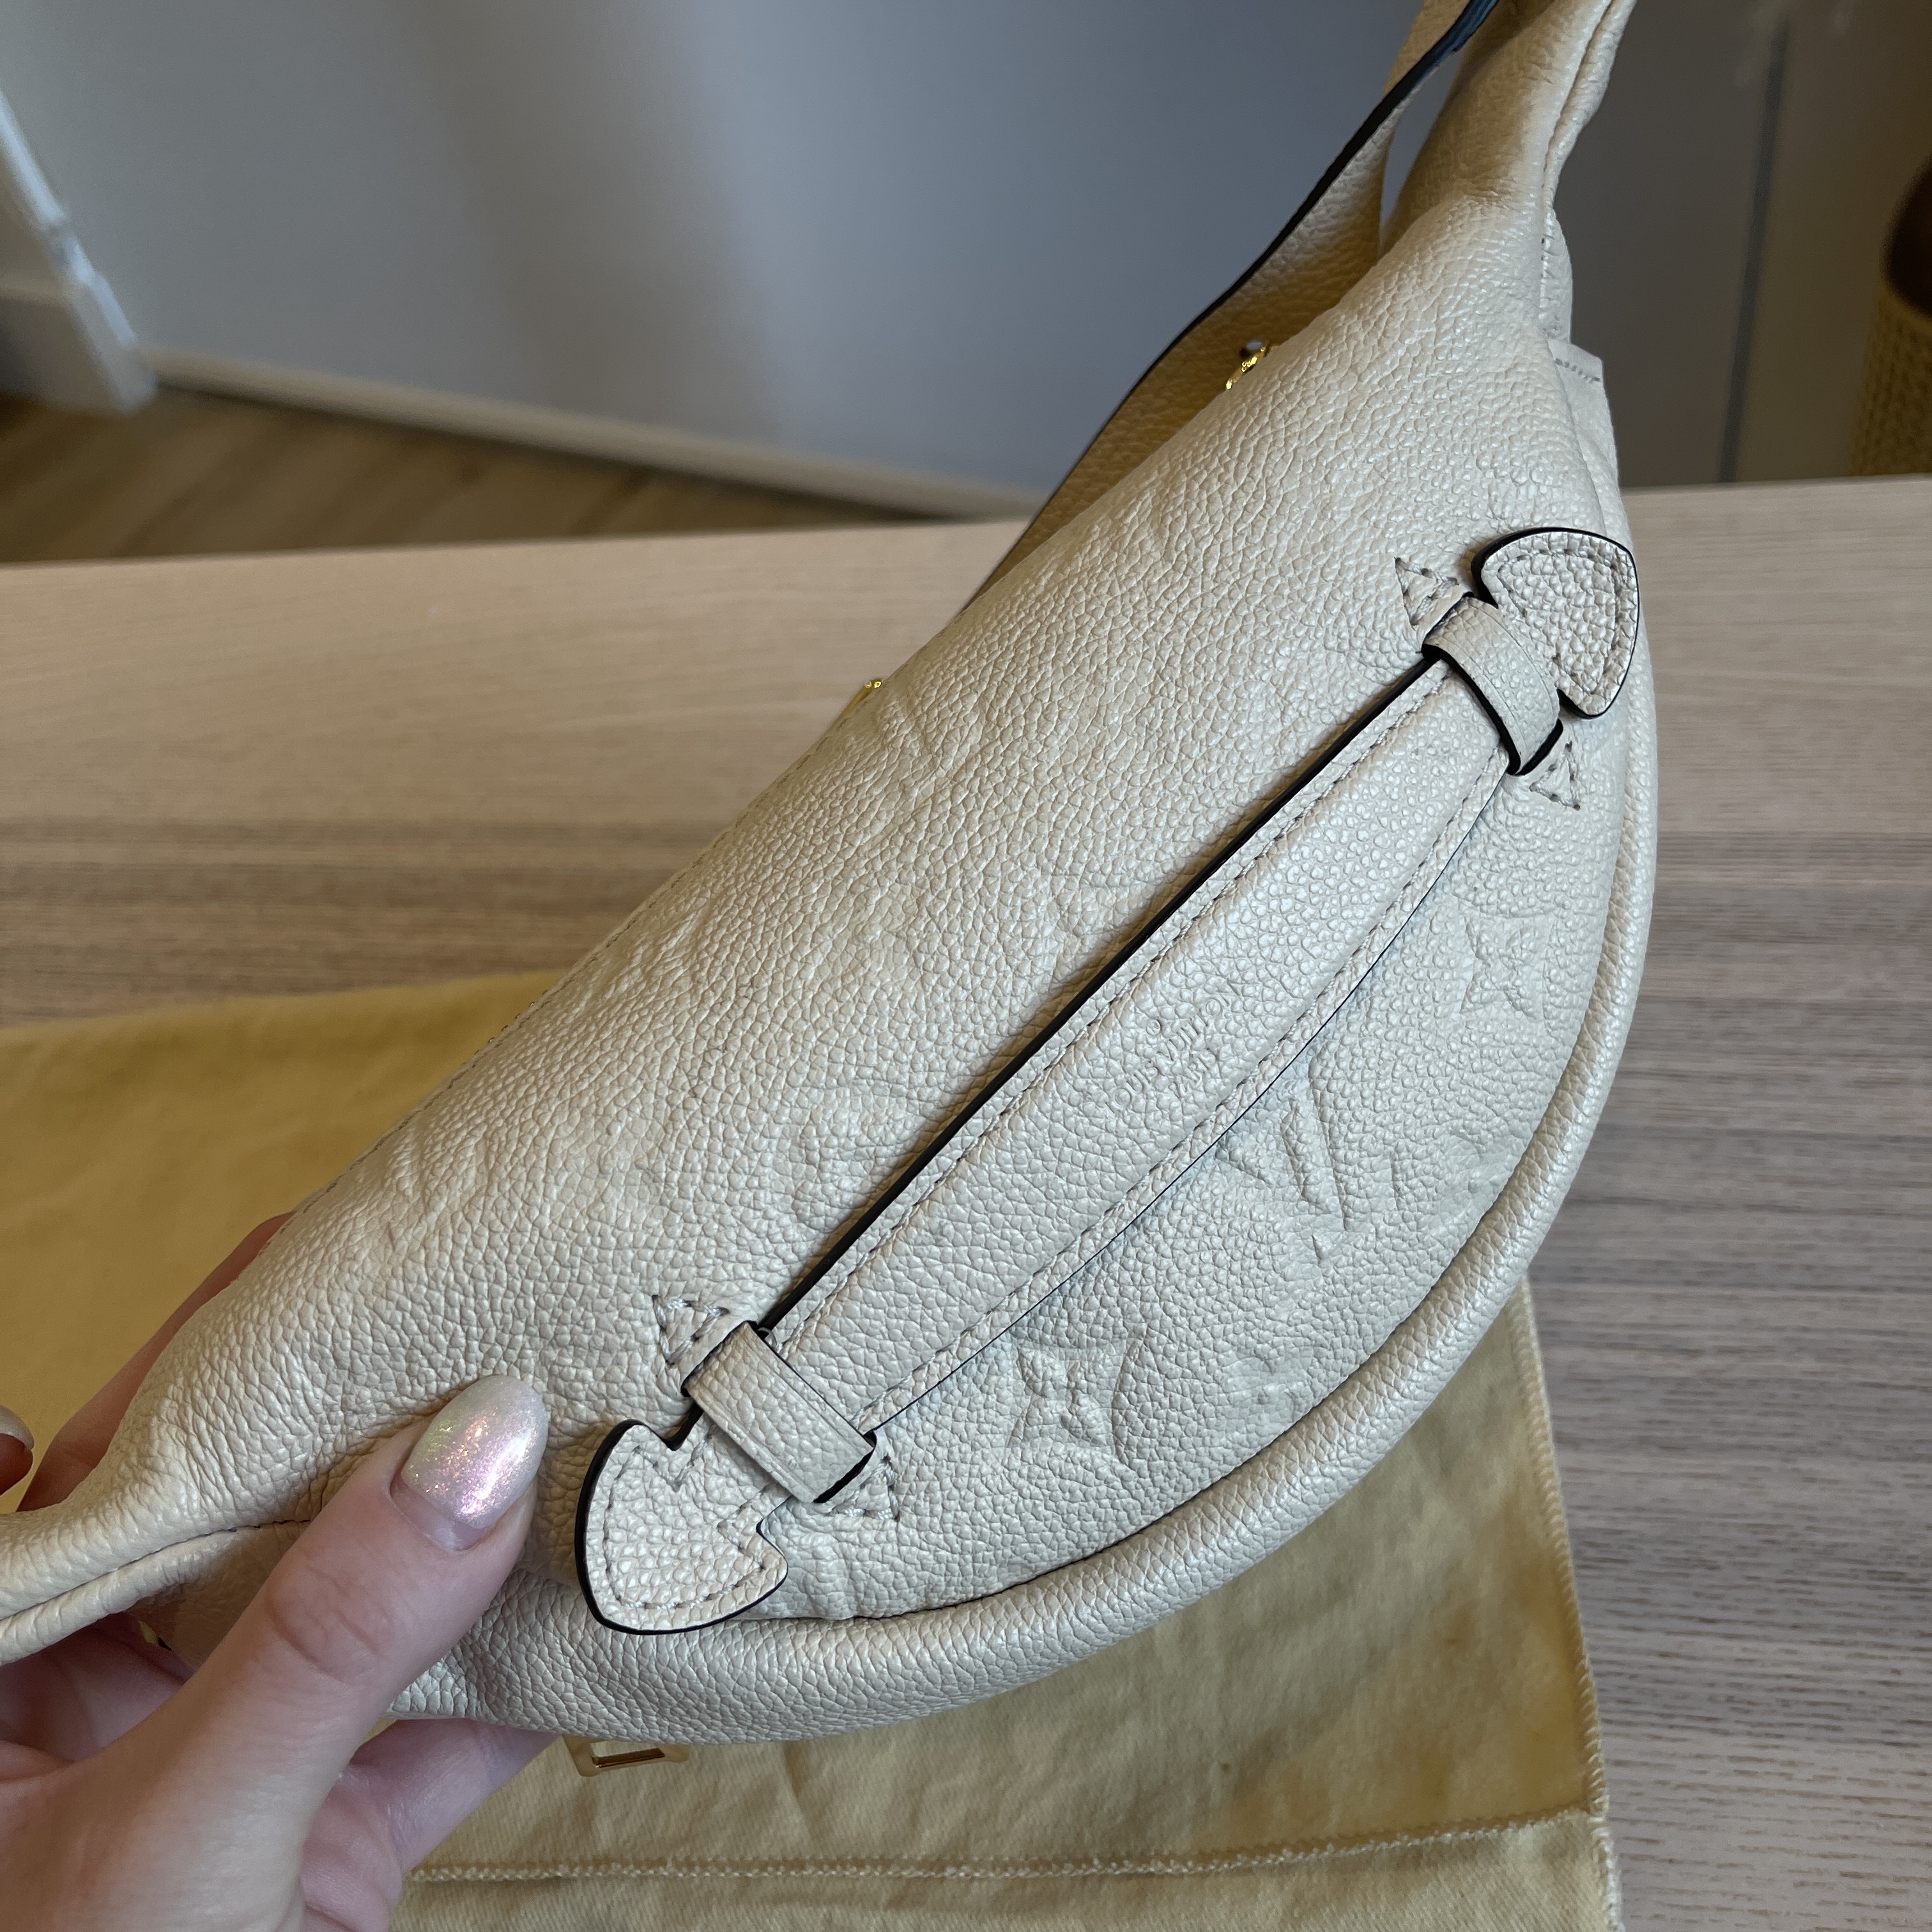 Monogram Empreinte Creme bumbag…Was this one quickly discontinued or only a  limited number produced? Can't even find it preloved : r/Louisvuitton